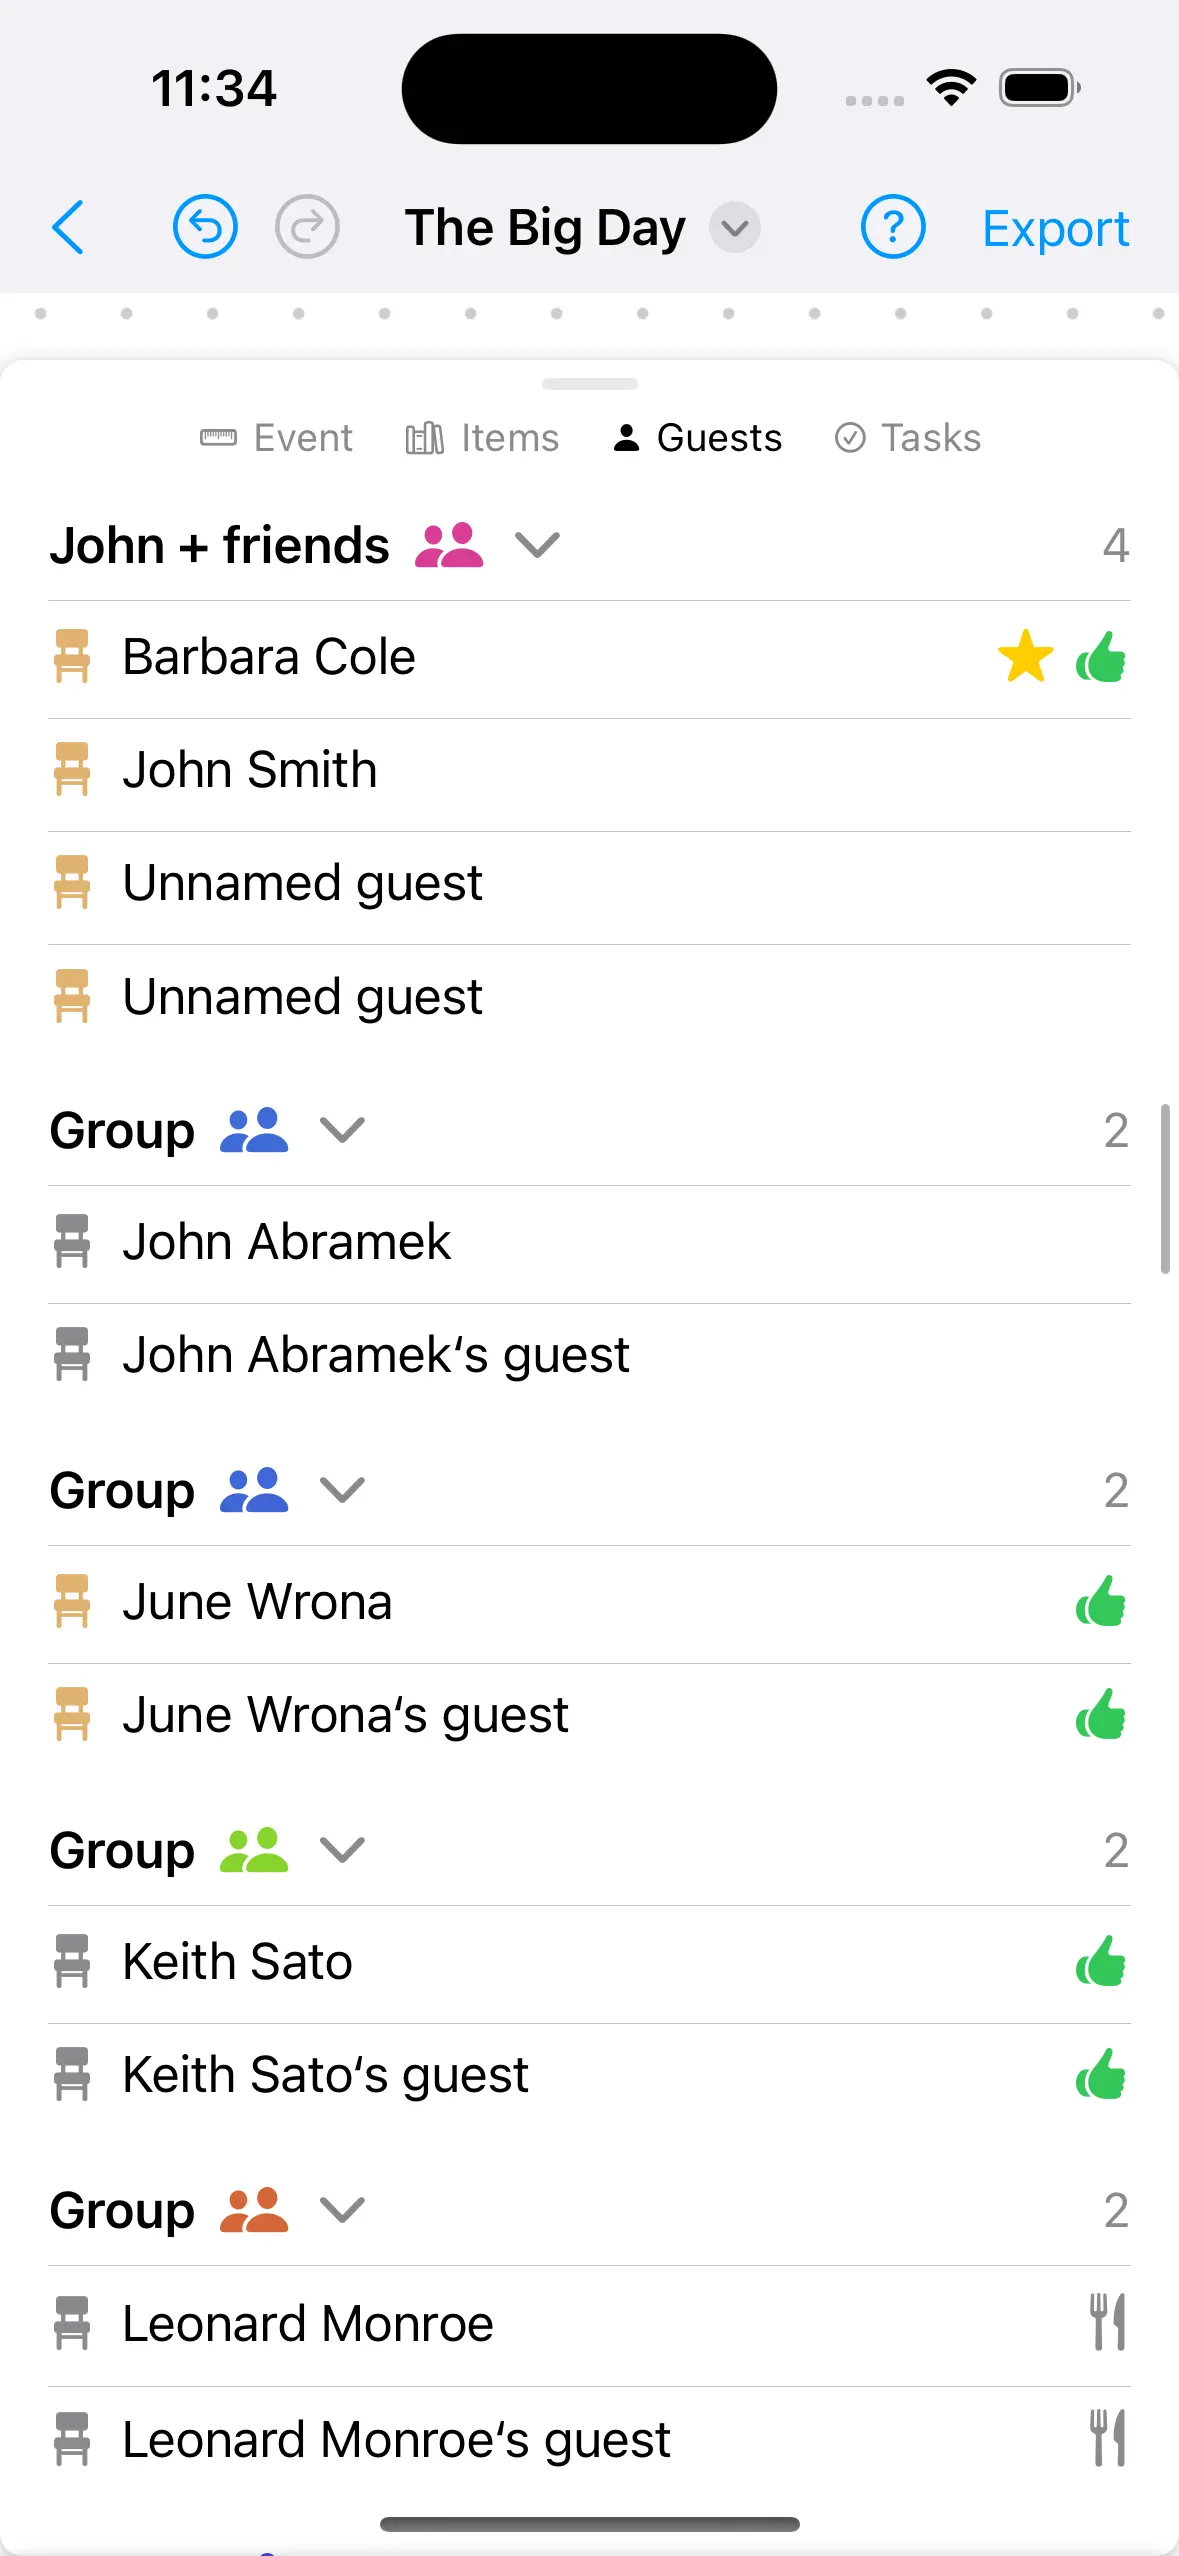 Example of the guest list showing grouping information and seeing guests next to their groups.